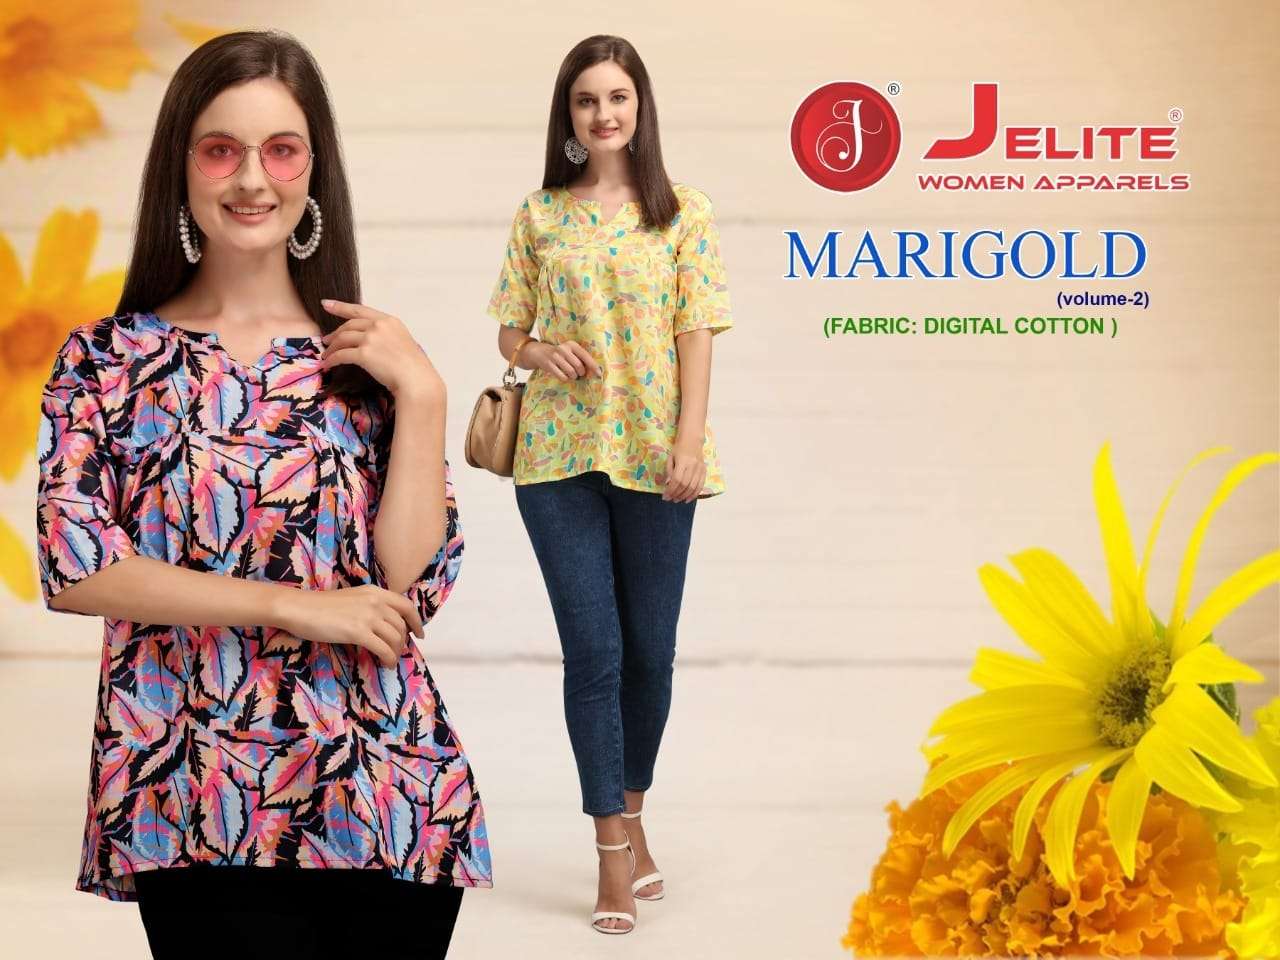 Marigold 2 Short Tops By Jelite With Cotton Digital Print